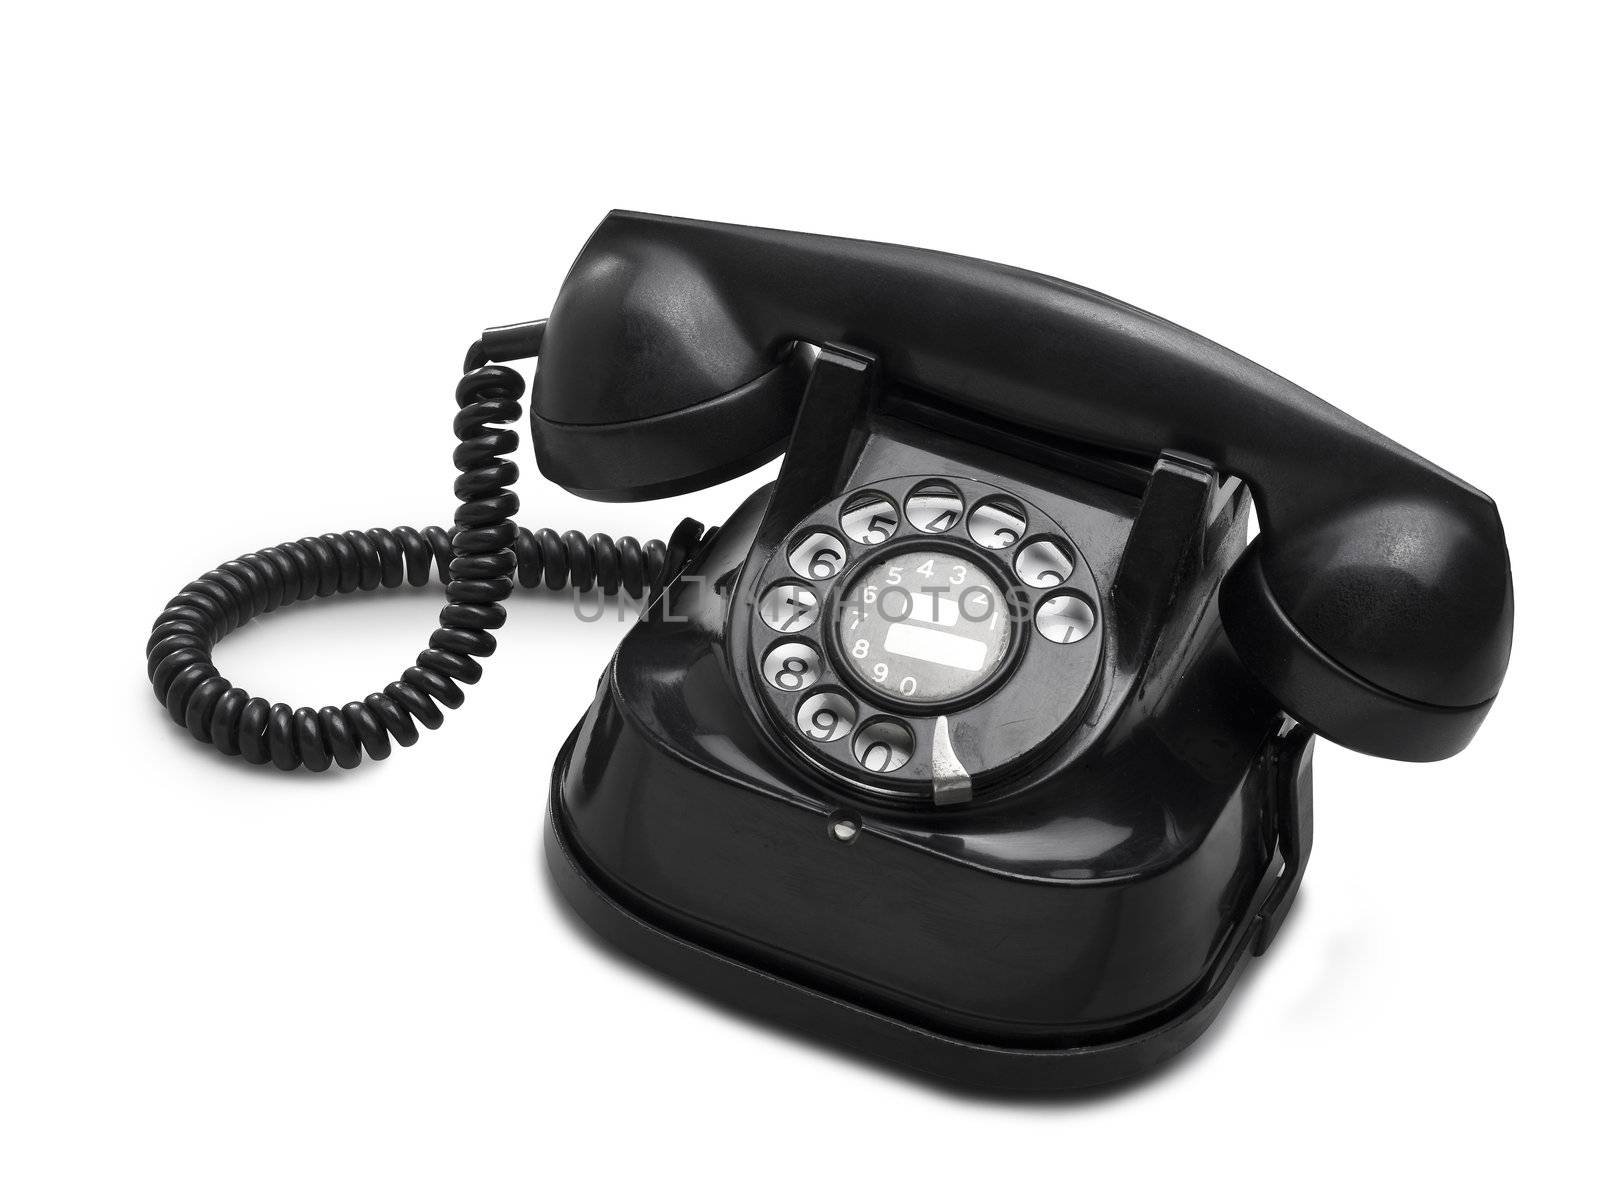 old telephone dial.(clipping path) by pbombaert